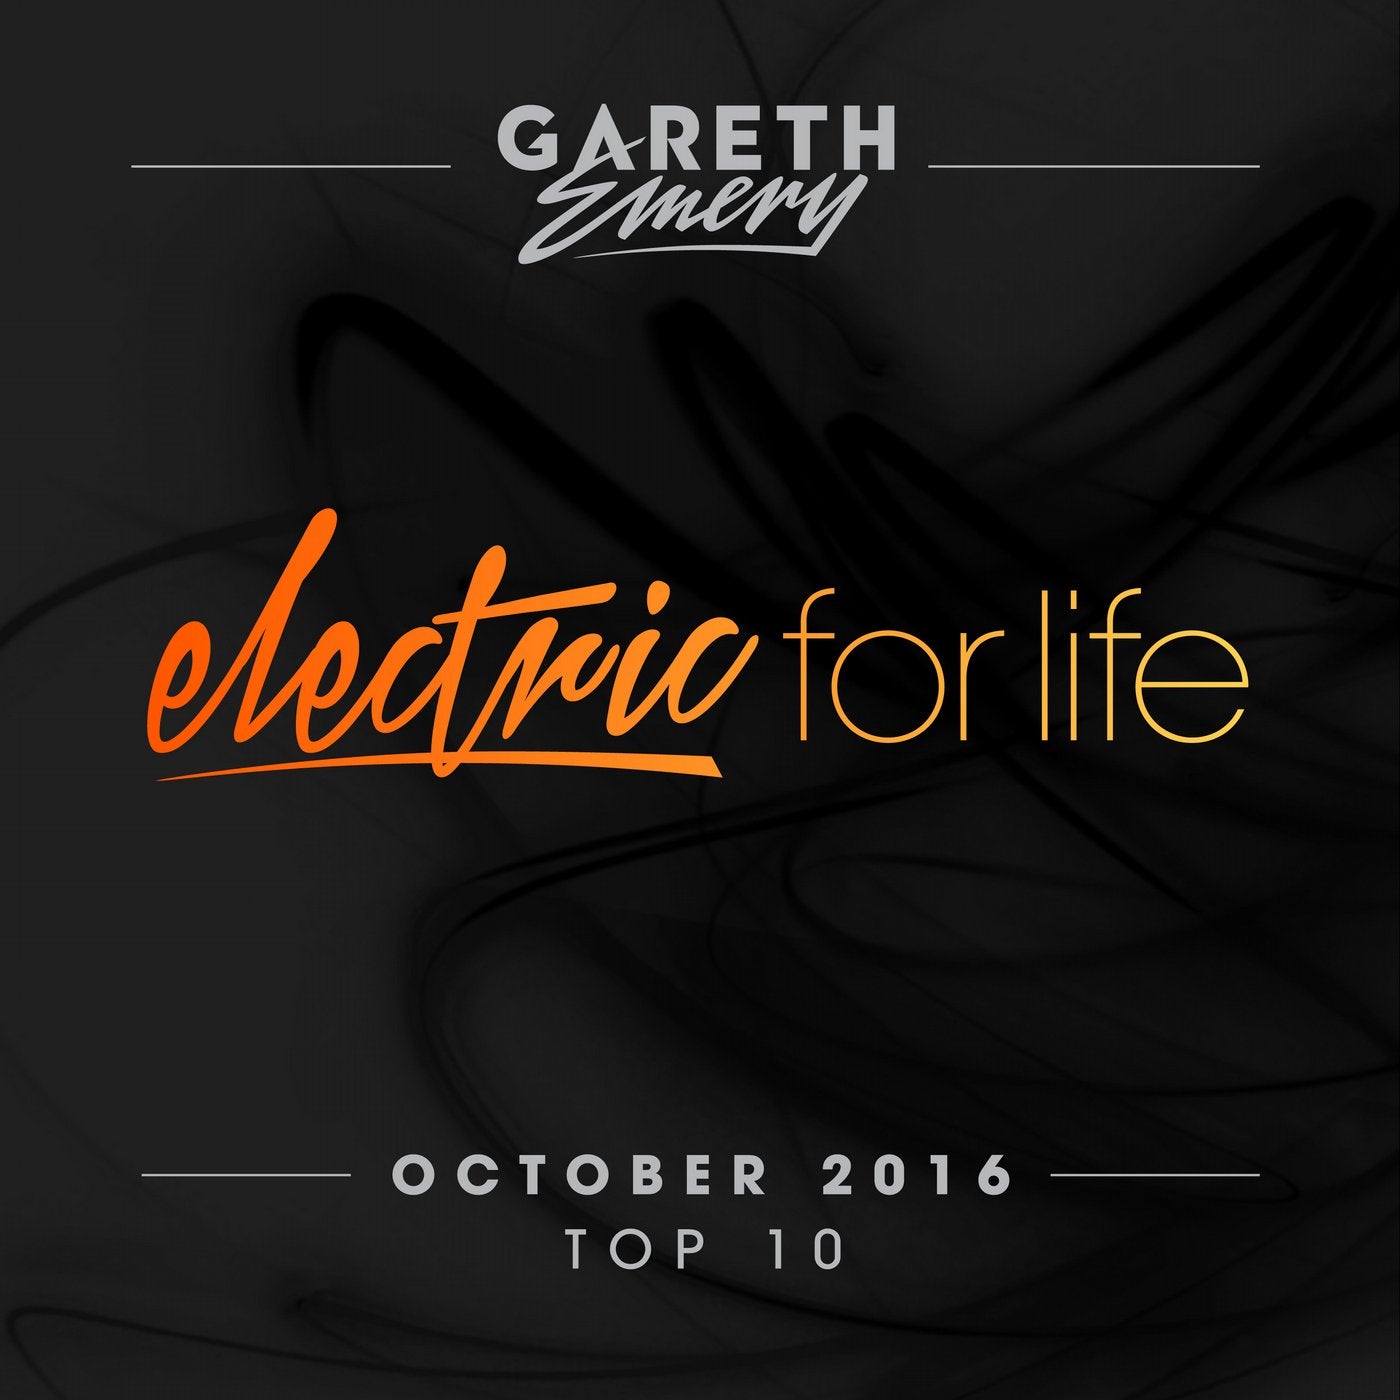 Electric For Life Top 10 - October 2016 (by Gareth Emery) - Extended Versions